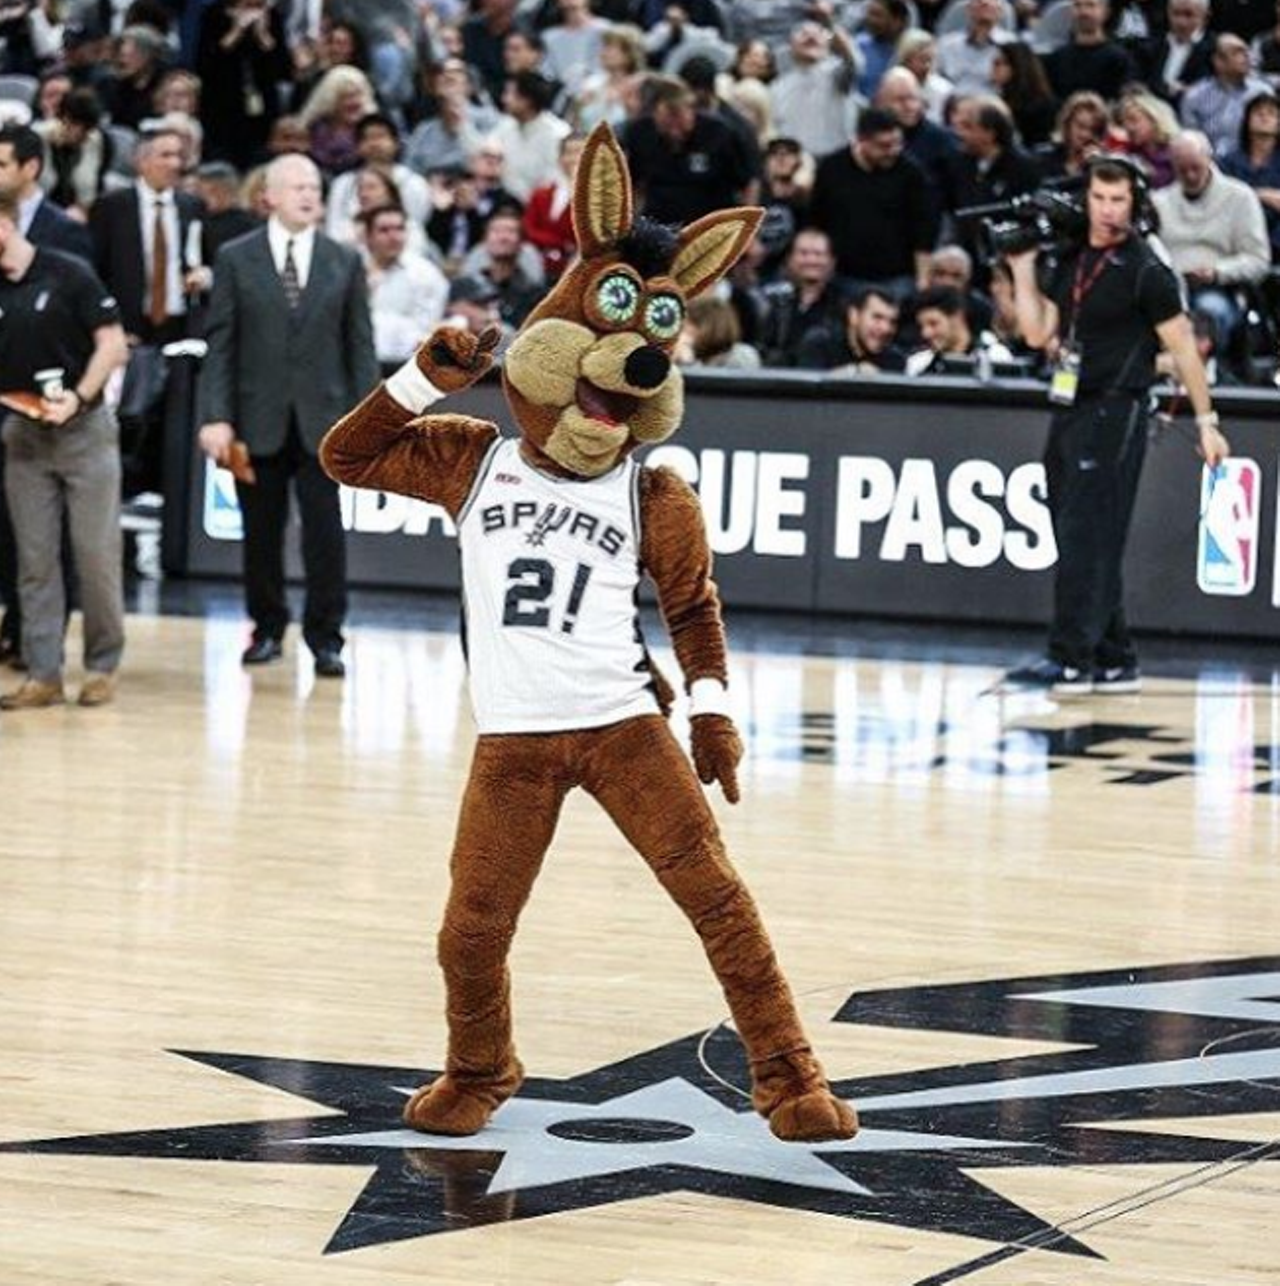 With help from the Spurs Coyote
There’s so many options, and you know the Coyote is down for a good time.
Photo via Instagram / spurscoyote